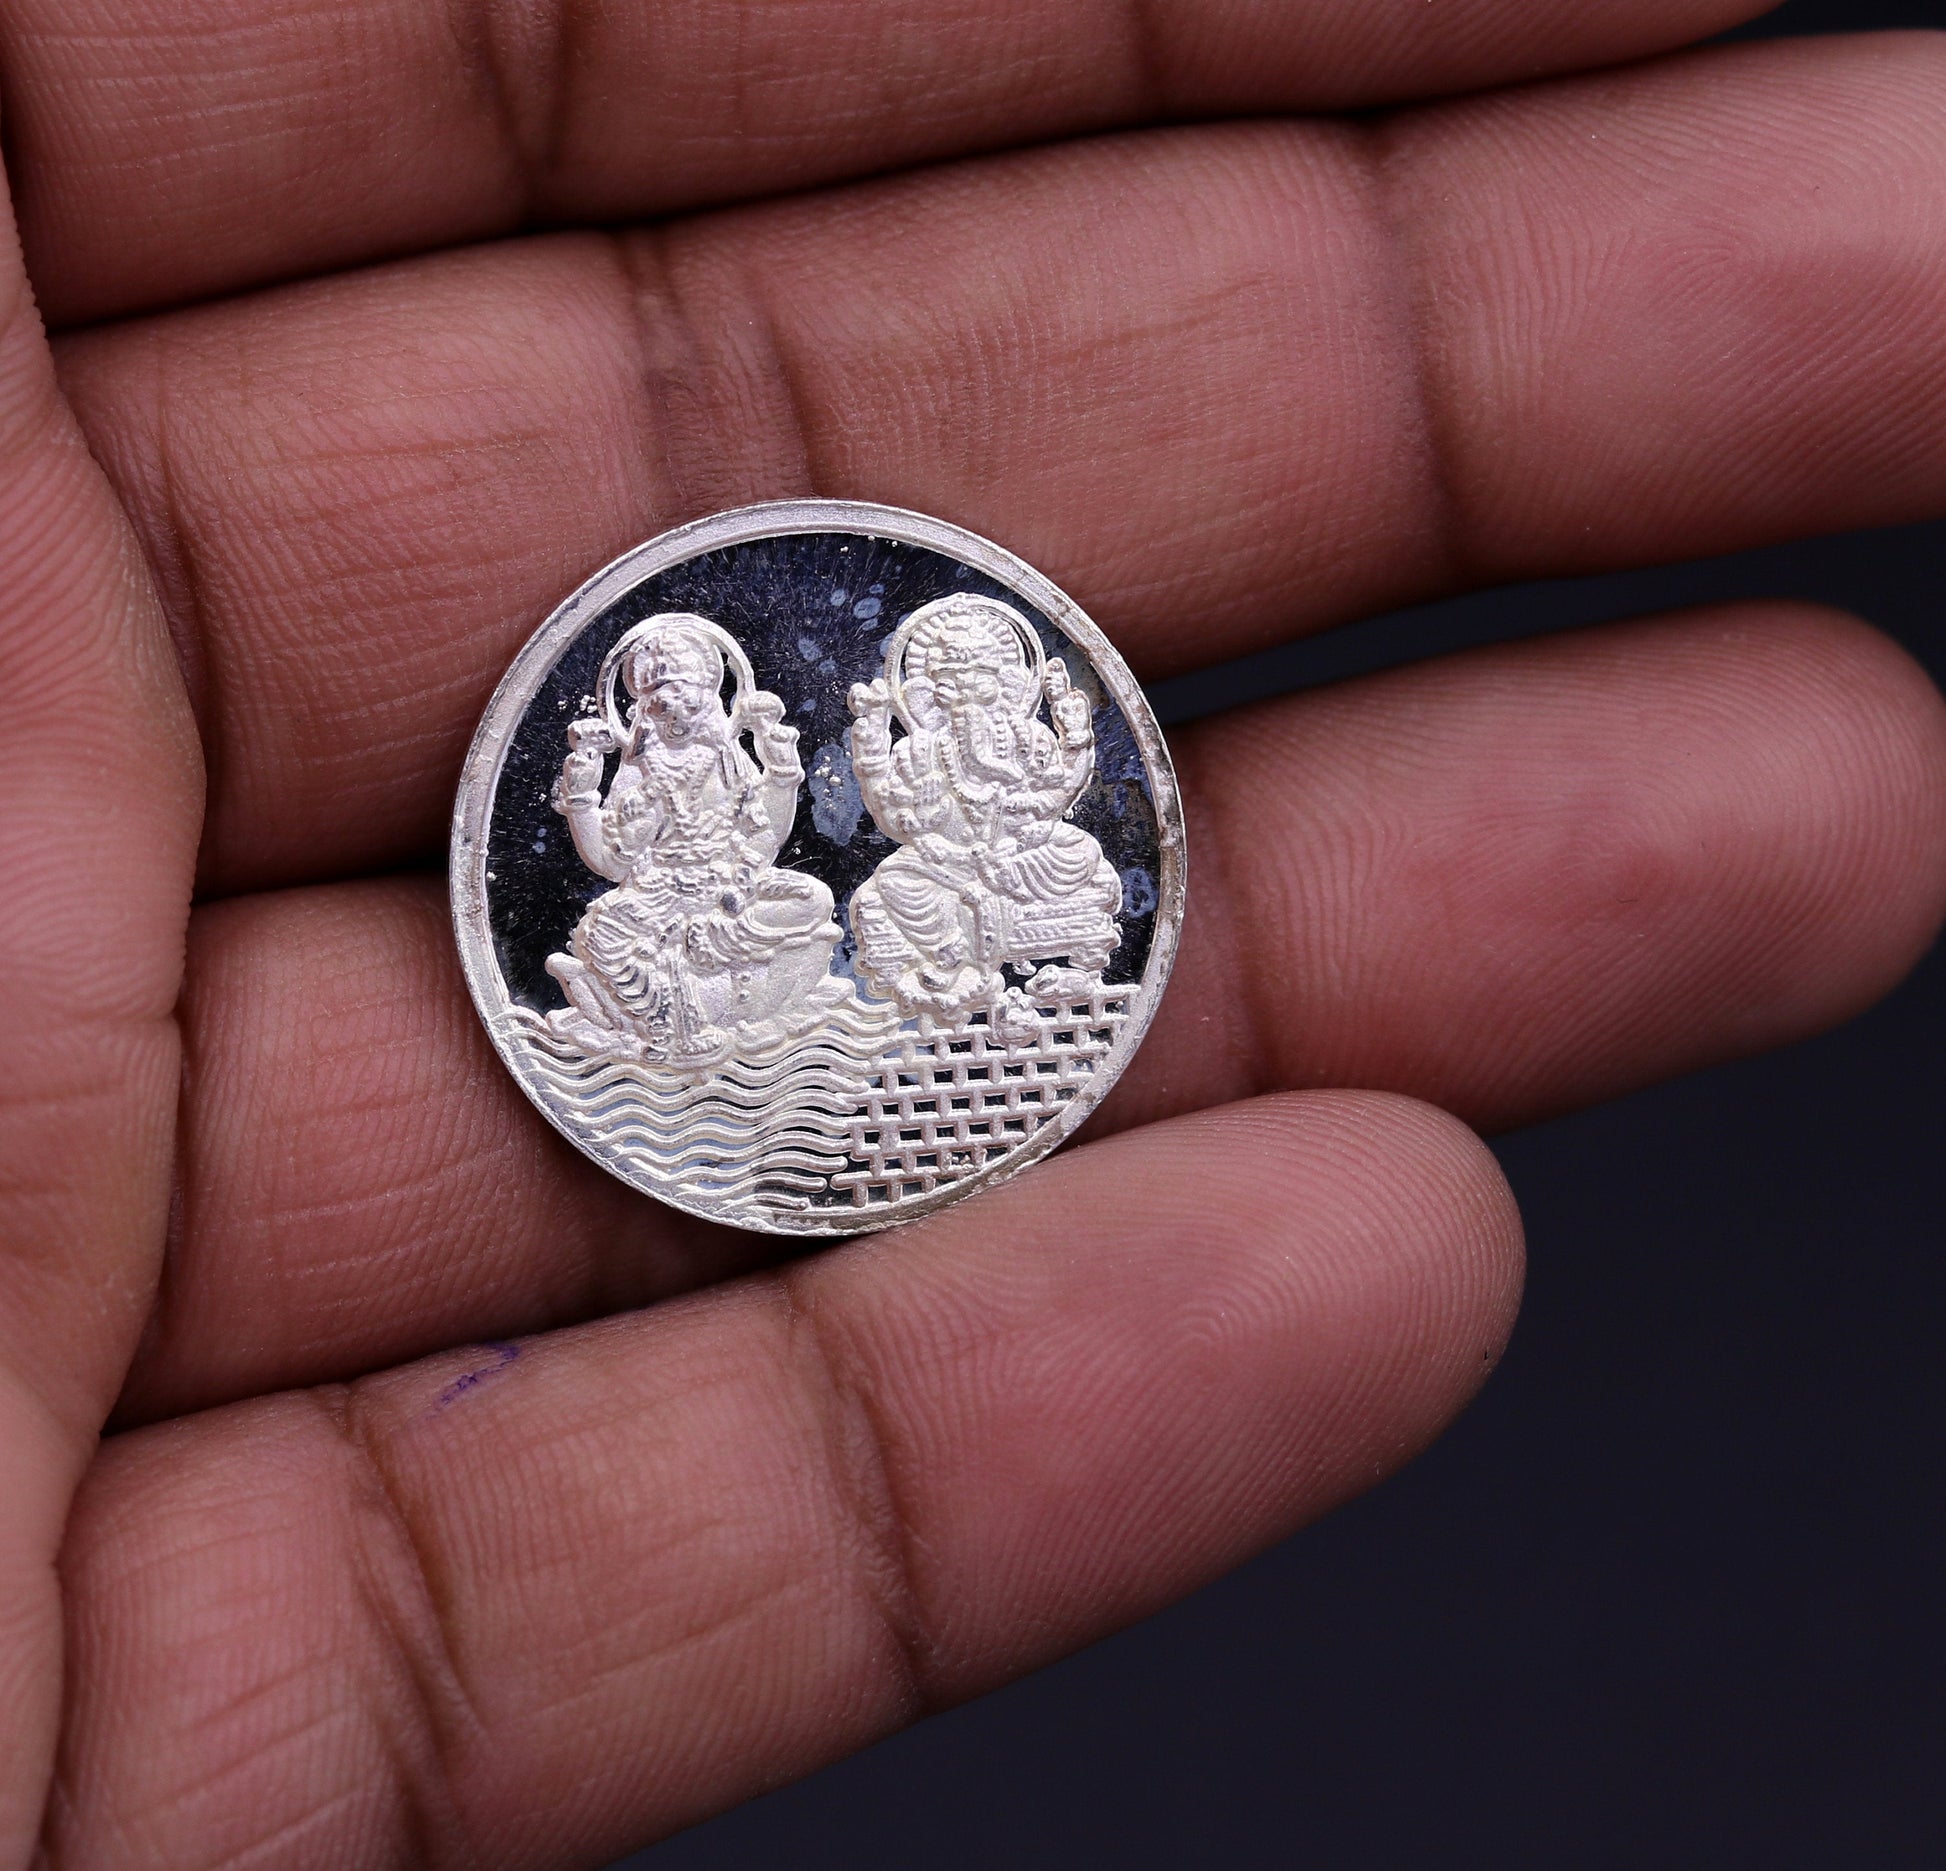 Pure solid 999 silver amazing Indian idol lord Ganesha Laxmi print 5 grams coin amazing gifting and collectible coin sst05 - TRIBAL ORNAMENTS